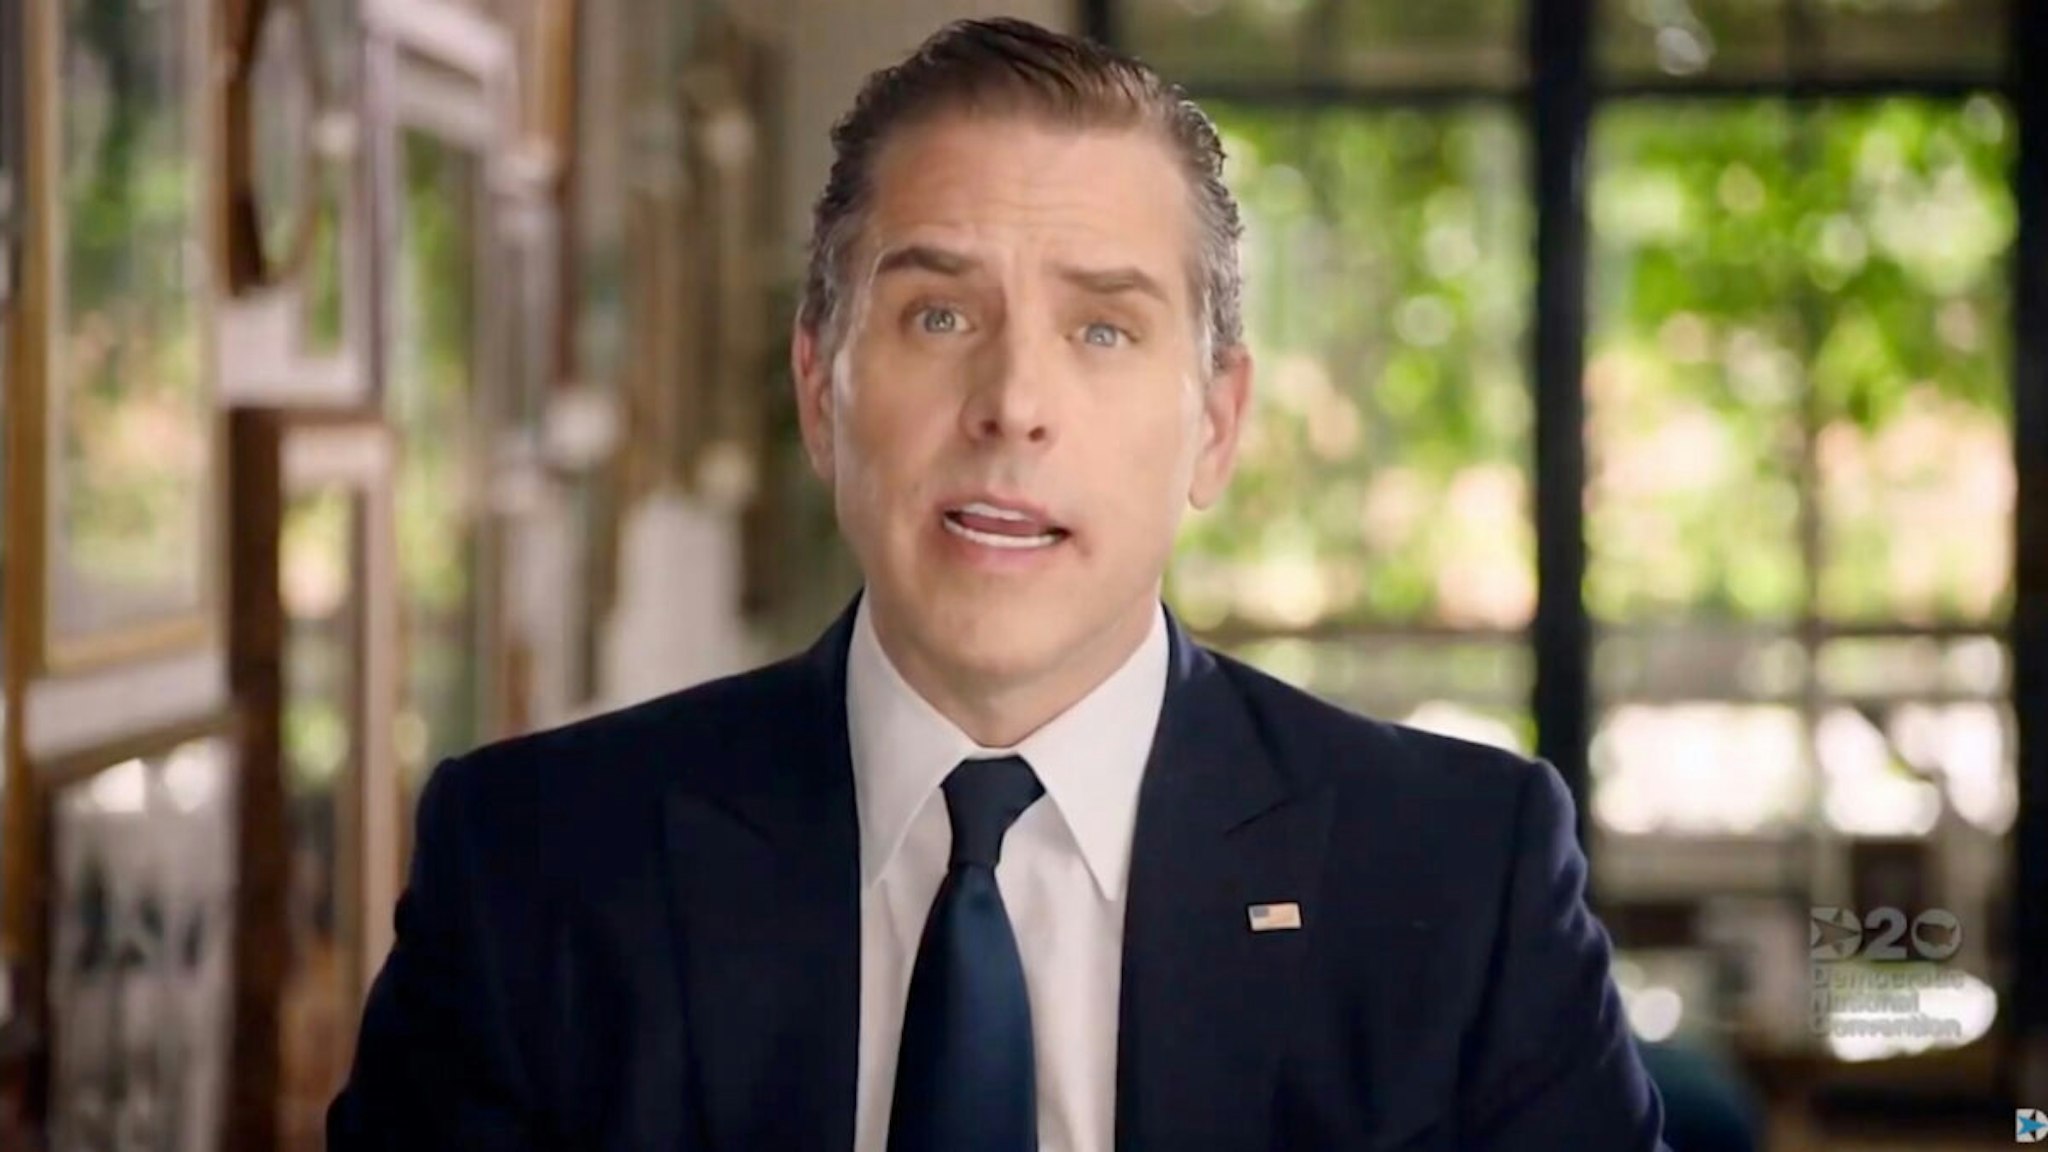 In this screenshot from the DNCC’s livestream of the 2020 Democratic National Convention, Hunter Biden, son of Democratic presidential nominee Joe Biden, addresses the virtual convention on August 20, 2020.